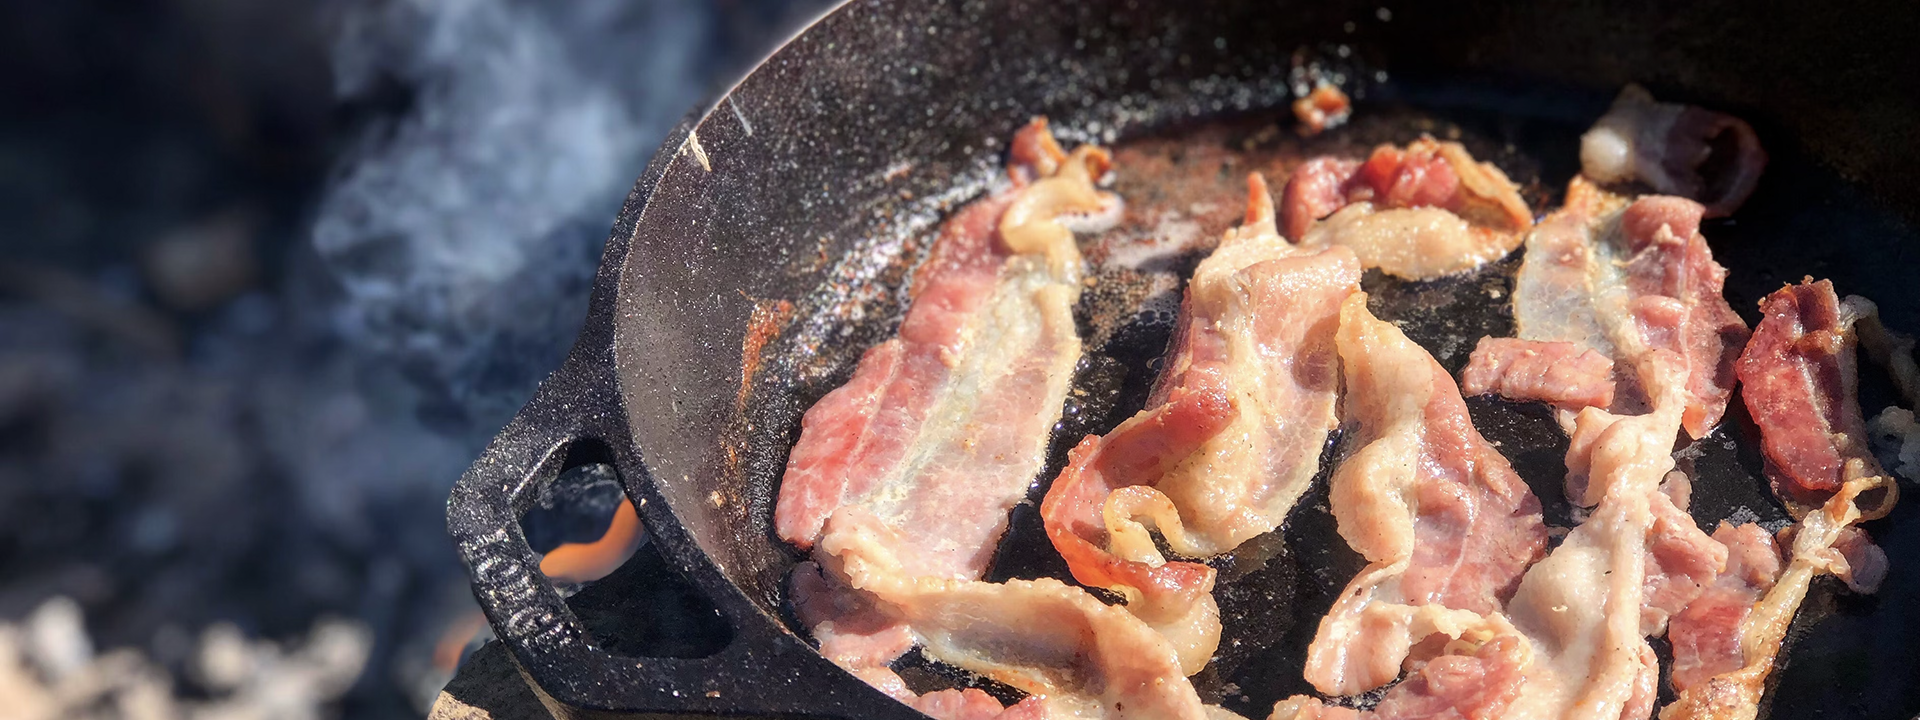 Bacon Sizzling in Cast Iron Skillet